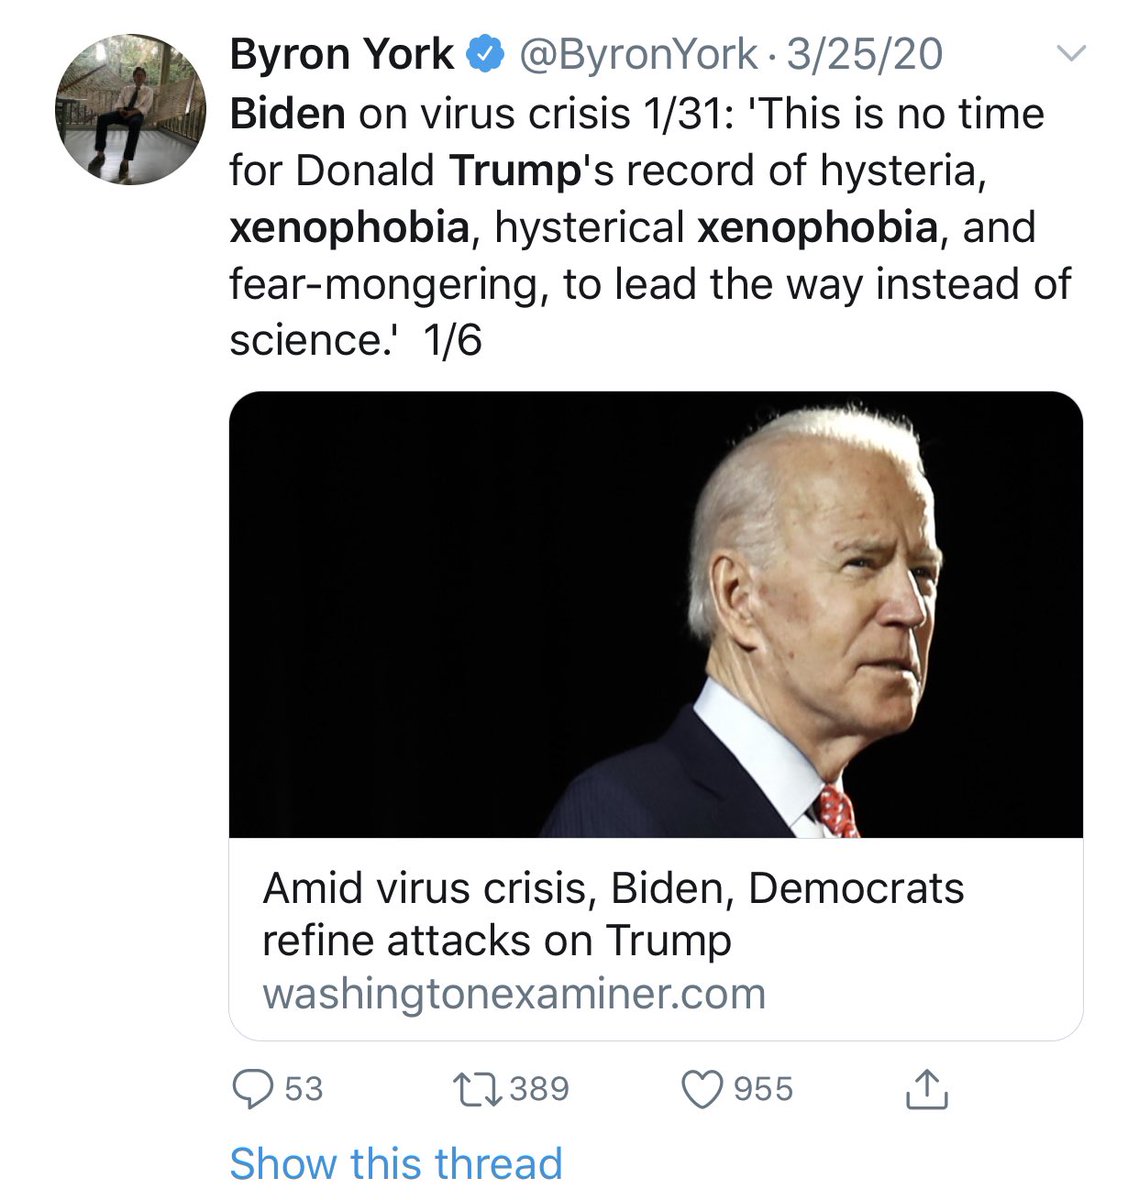 Really an embarrassing turn from Biden.He went from calling the China travel restrictions “hysterical,” “xenophobic,” “fear-mongering” in January to now attacking the President for not blocking *more* people from China.An entire campaign of Monday Morning Quarterbacking.